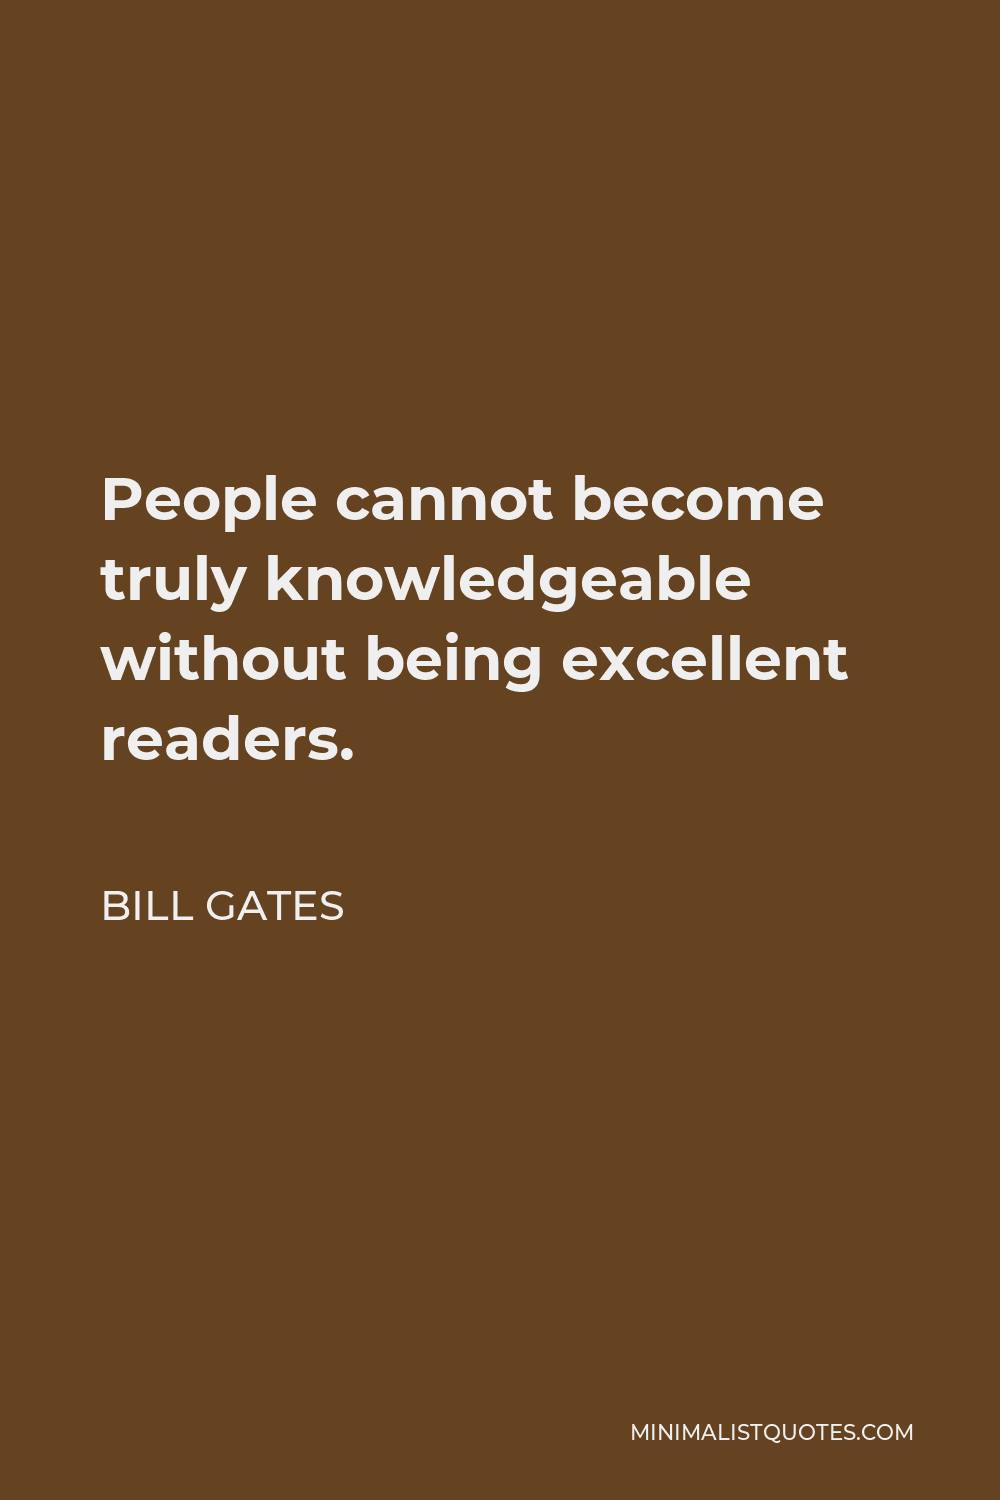 Bill Gates Quote - People cannot become truly knowledgeable without being excellent readers.